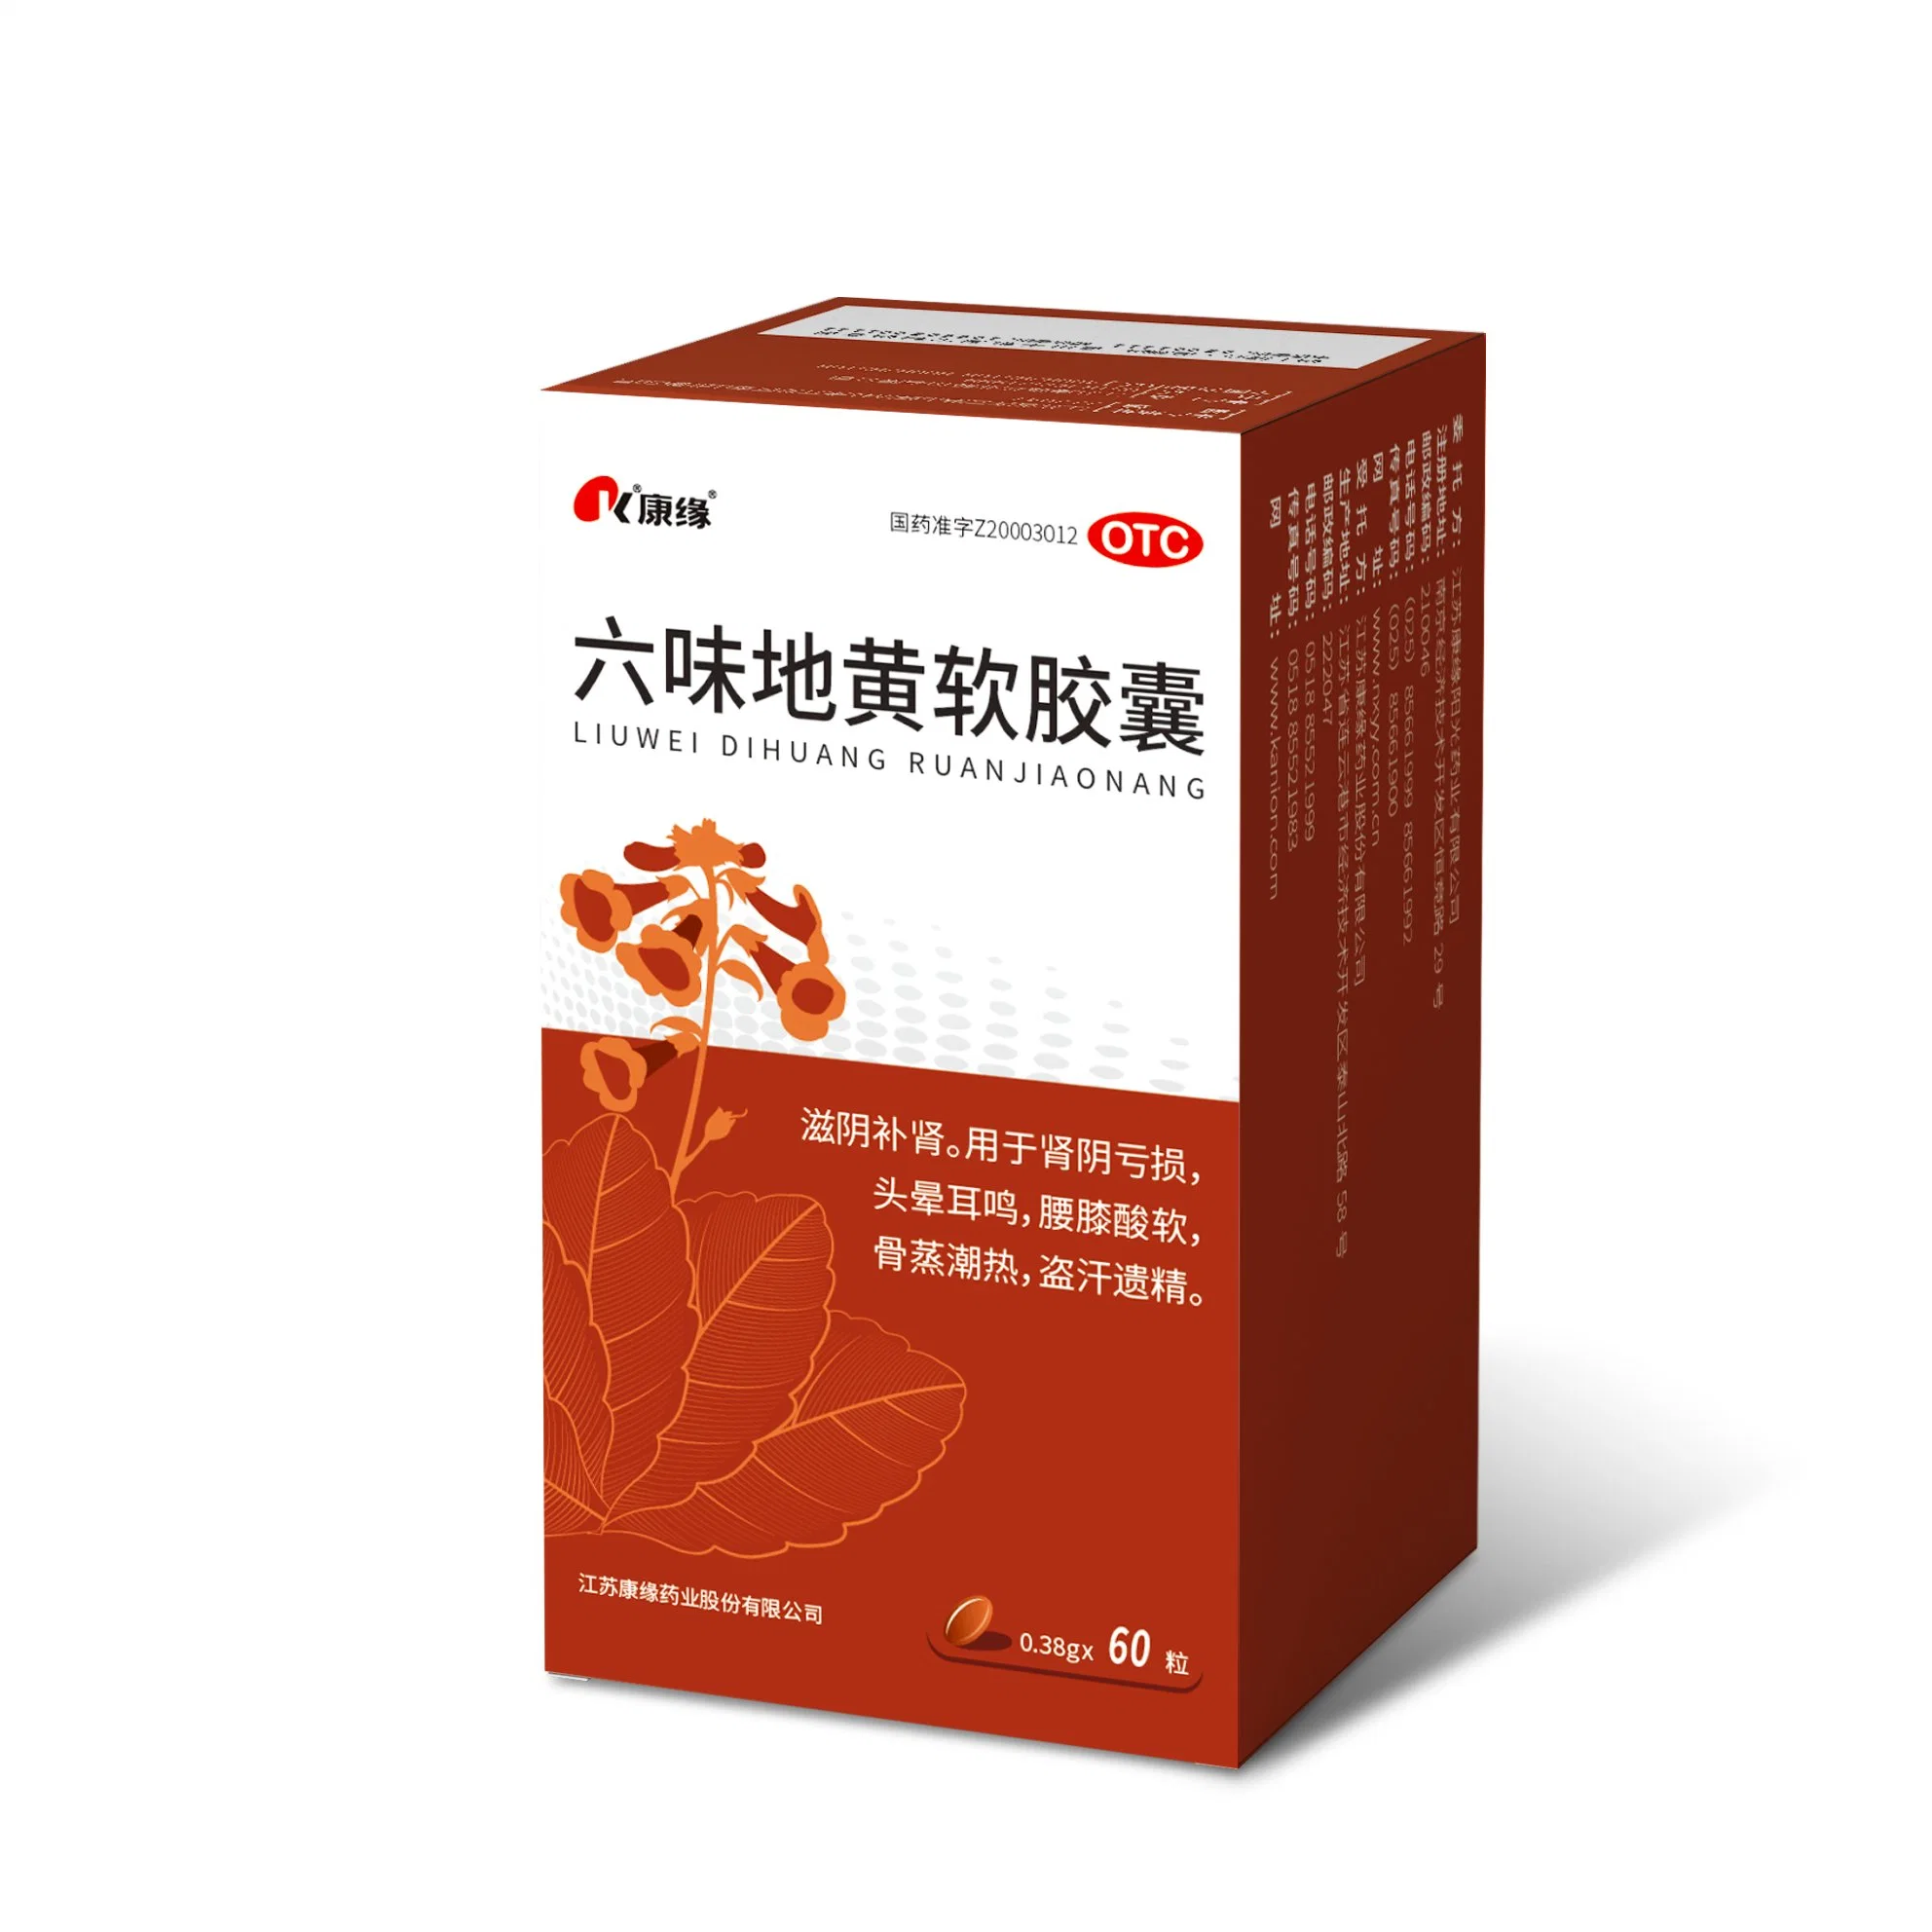 High Quality Herb Chinese Medicine for Tonic Class Use Chinese Herb Extract Supplier